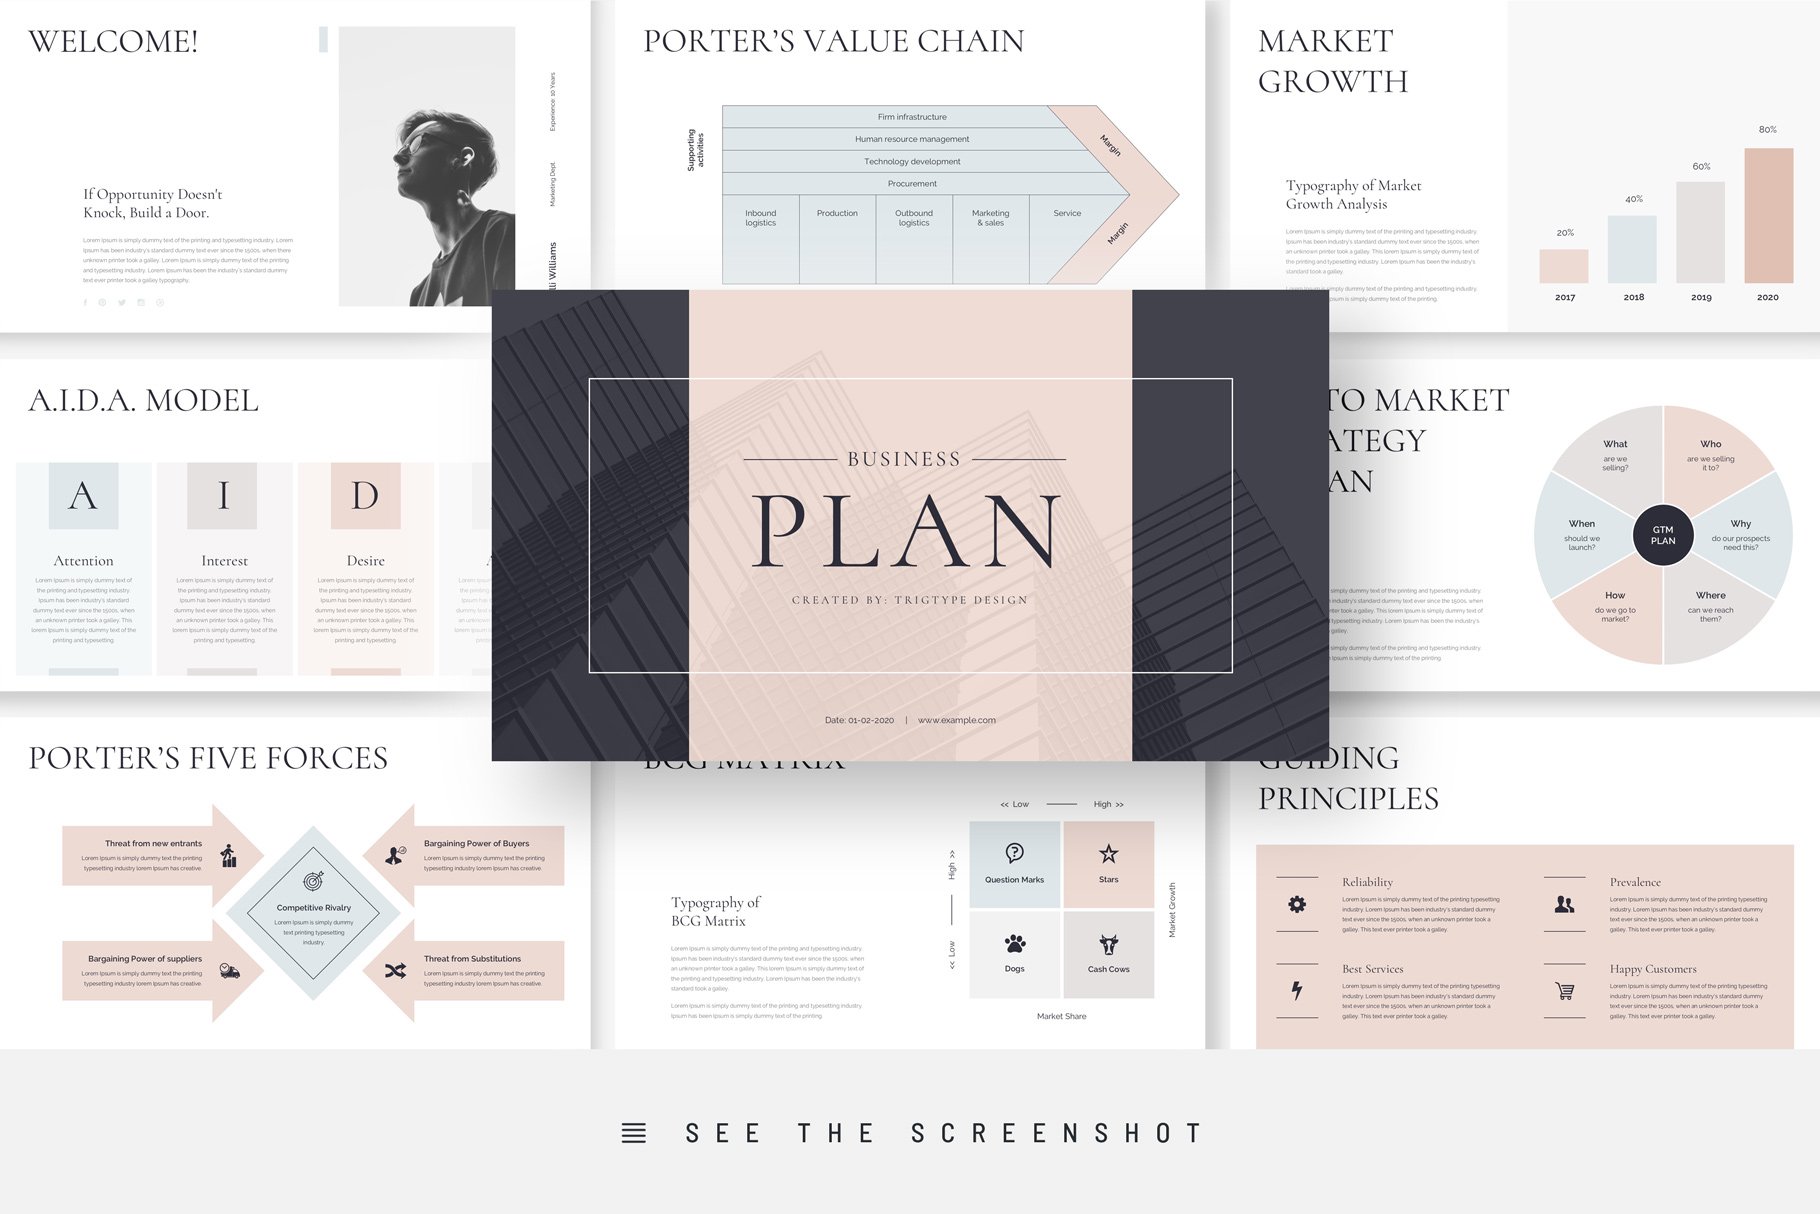 professional powerpoint presentation template